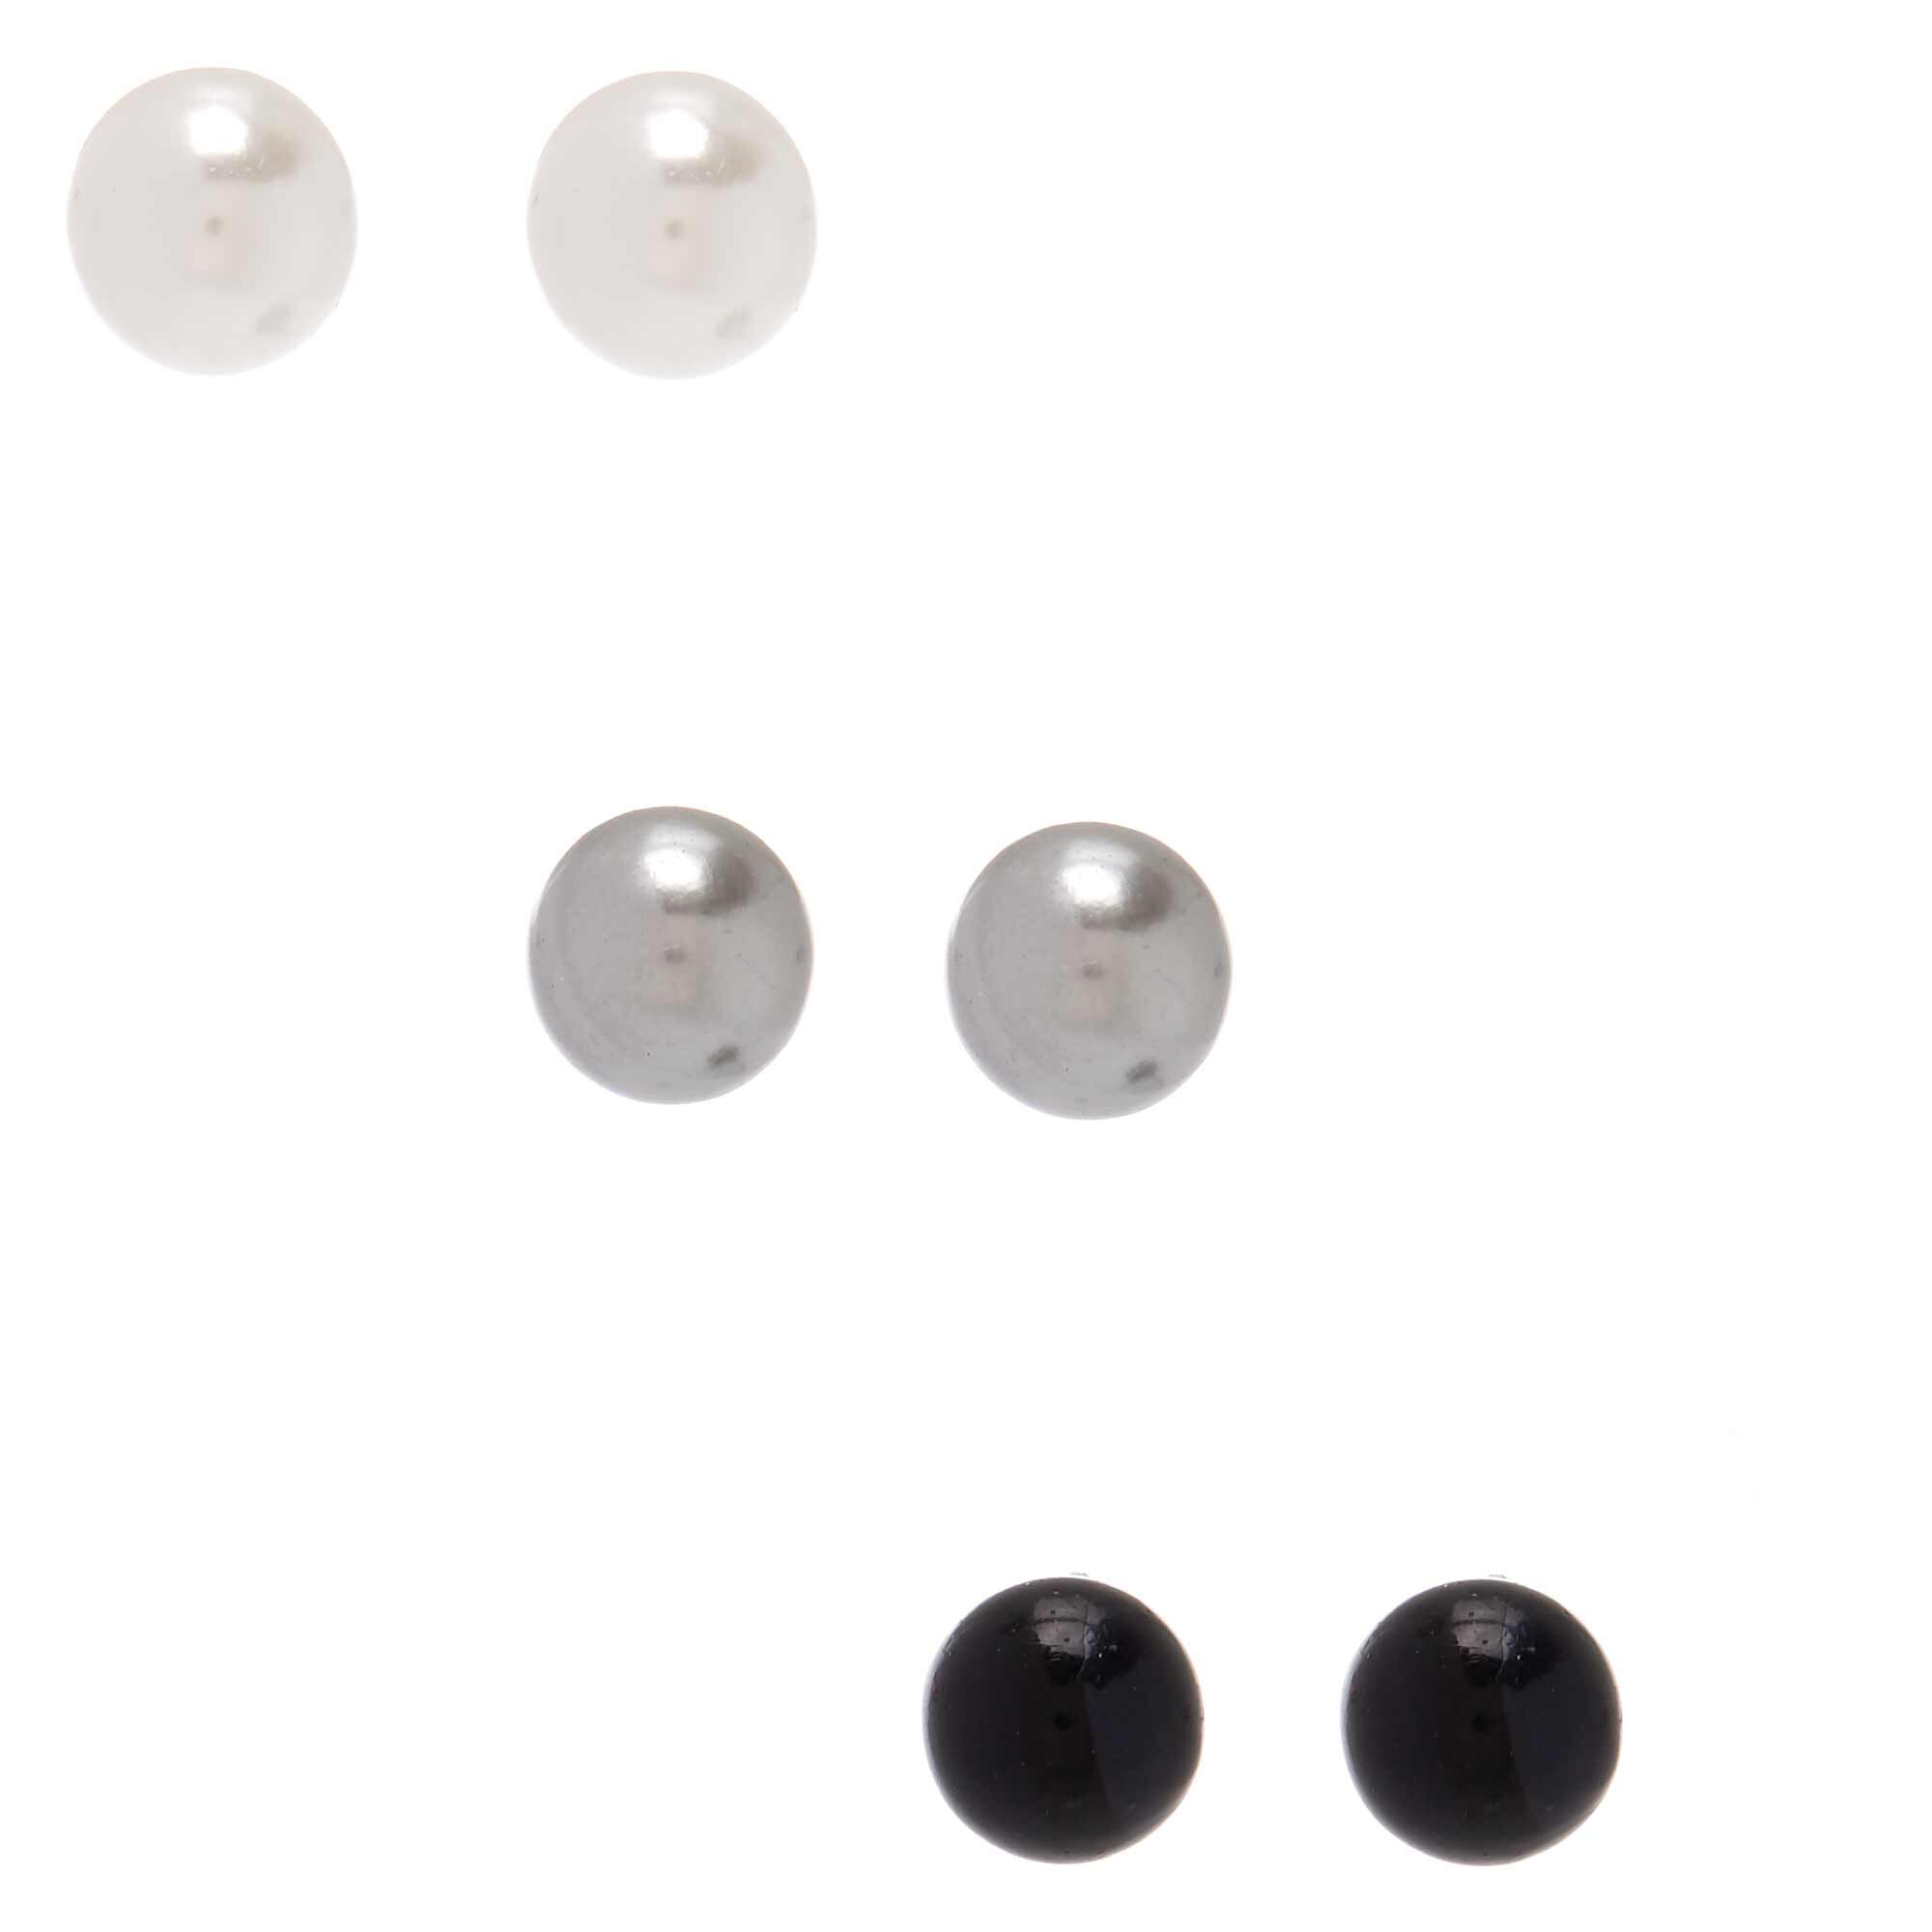 View Claires Tone Pearl Stud Earrings 3 Pack Silver information